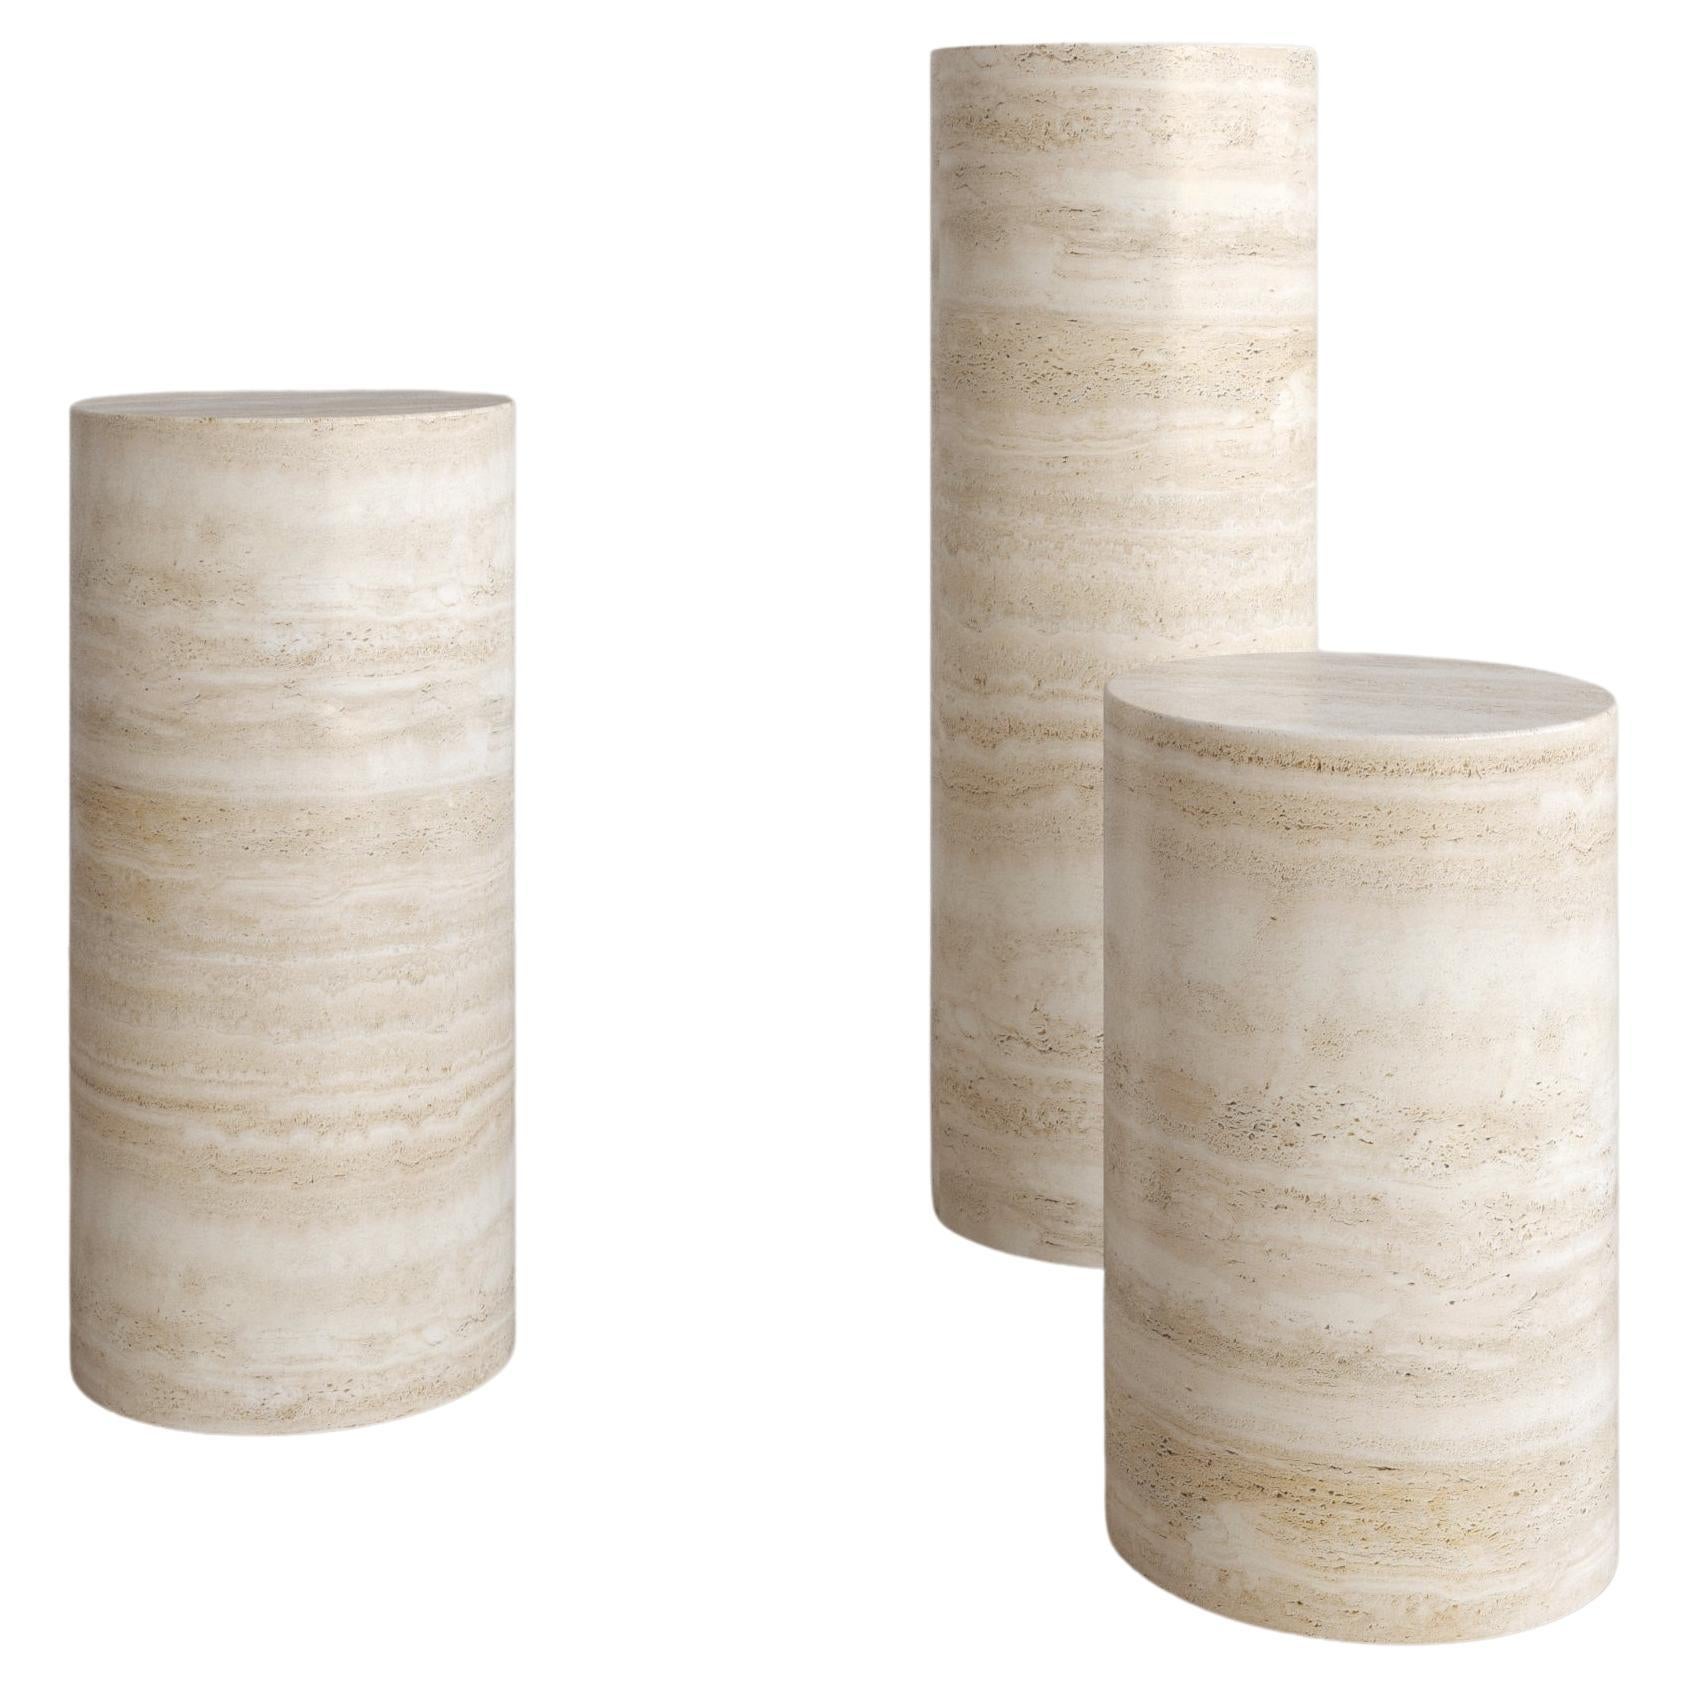 900mm Nude Travertine Voyage Pedestal by The Essentialist For Sale